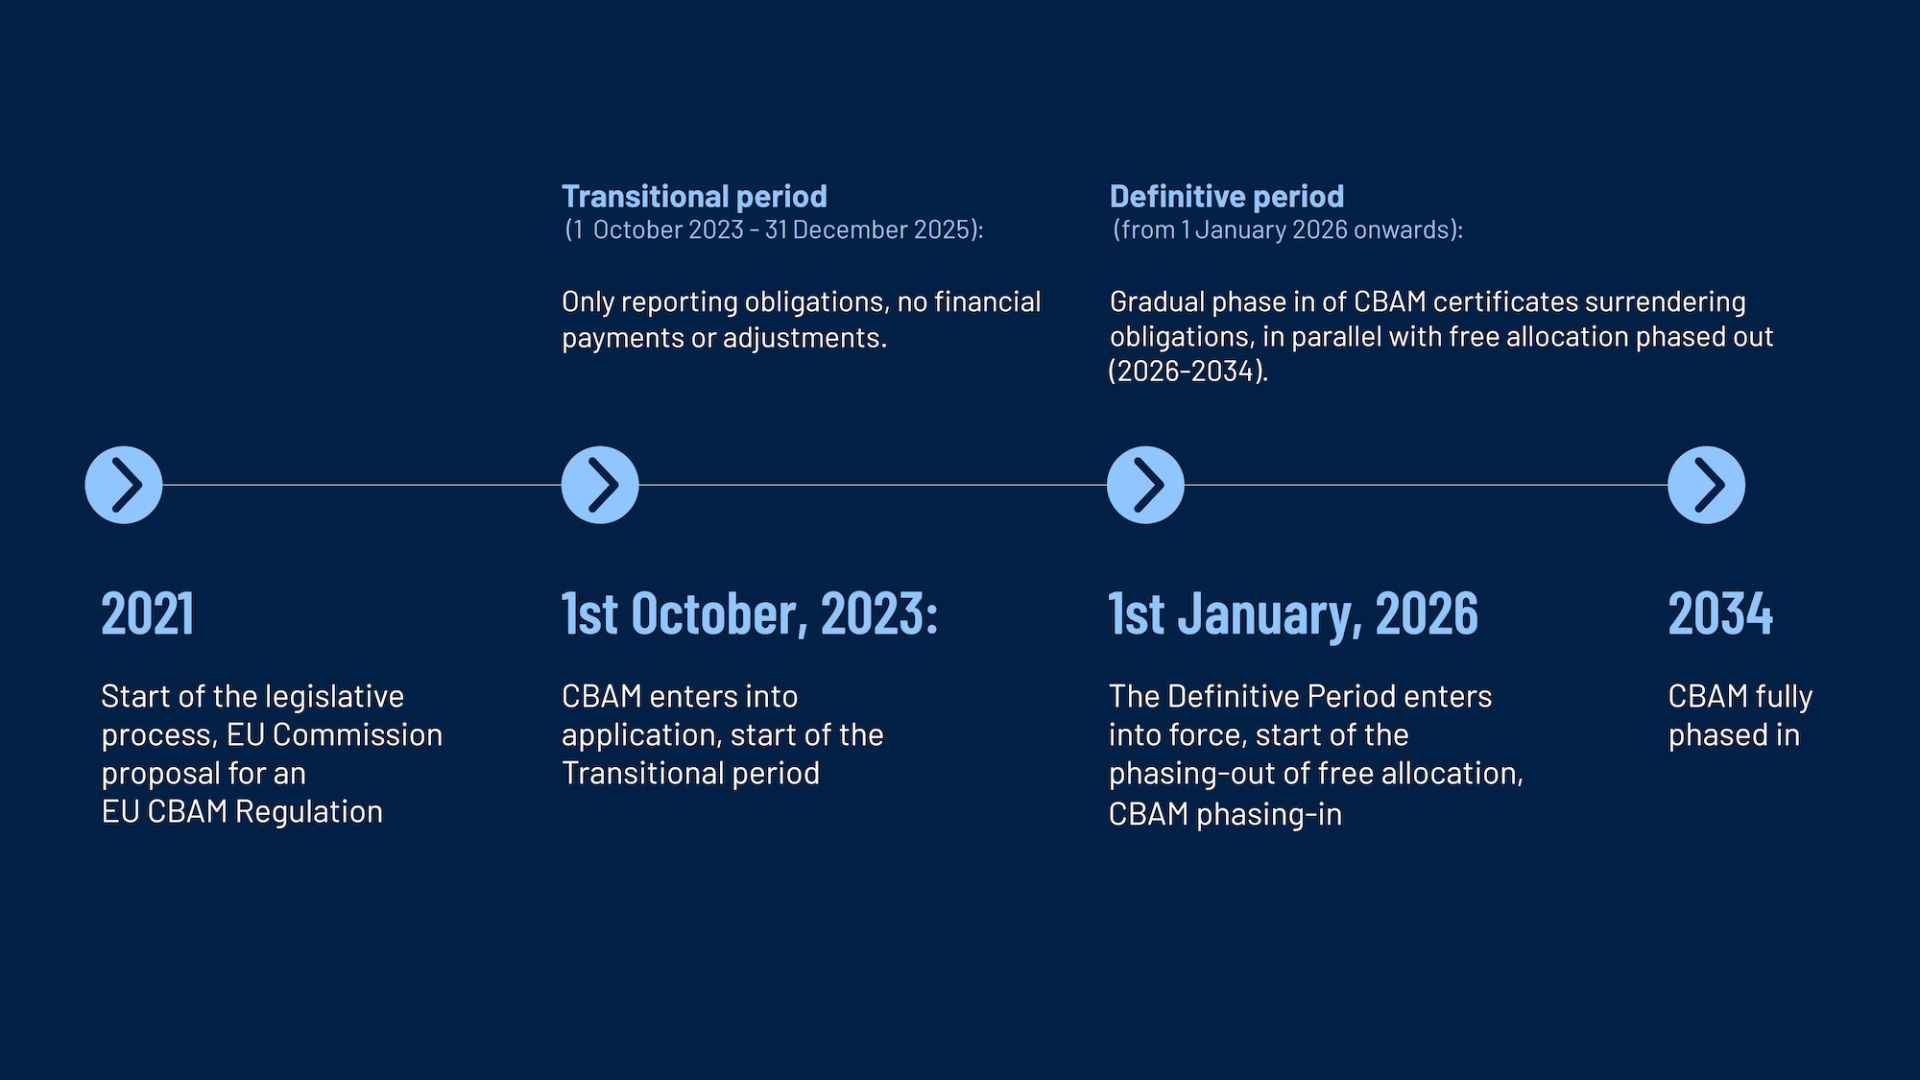 The EU CBAM transitional period started in October 1, 2023. The sectors covered in the first phase of CBAM include: cement, iron and steel, aluminium, fertilisers, electricity and hydrogen.